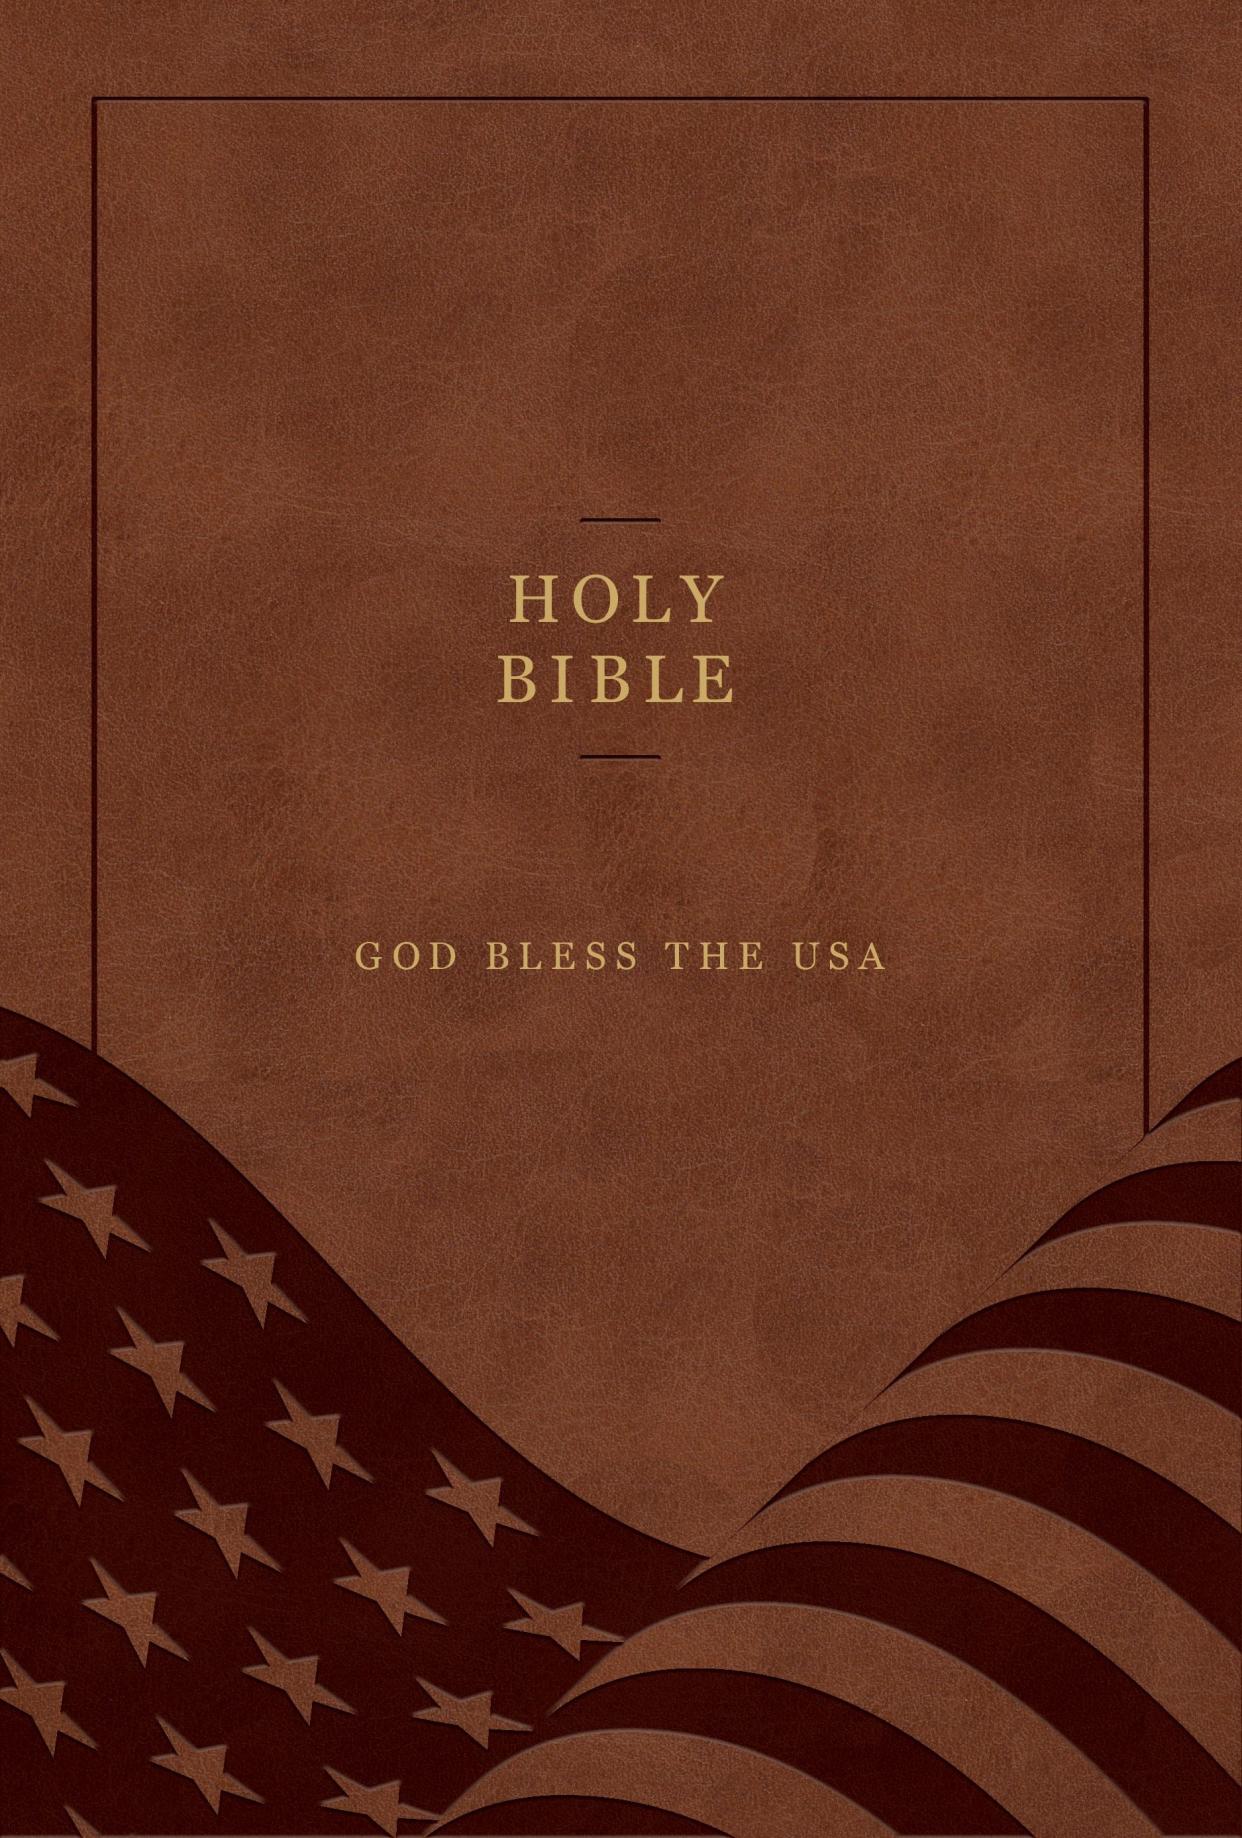 A cover of the God Bless The USA Bible, as seen in a 2021 version.